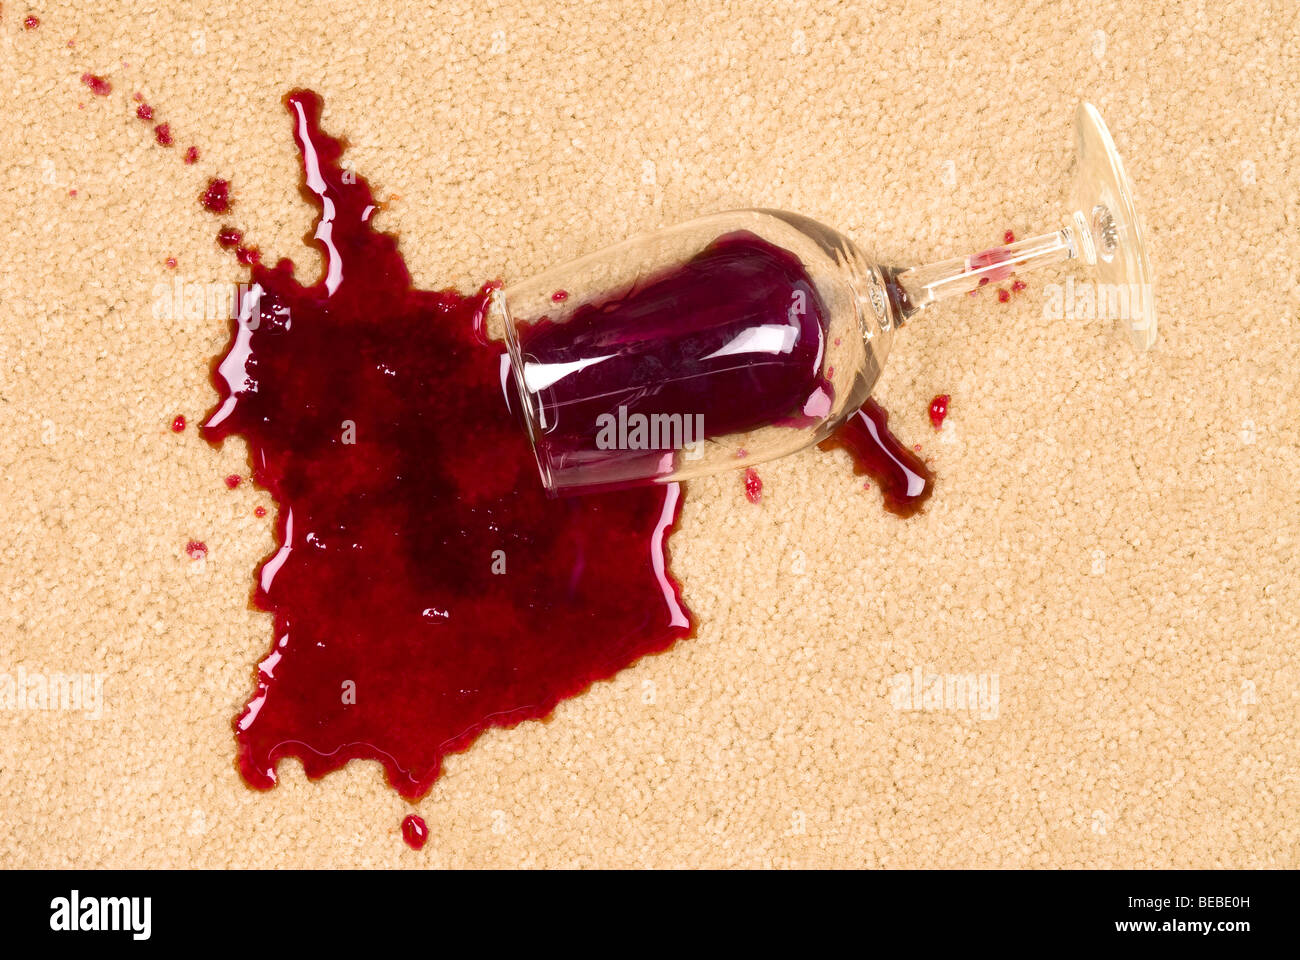 A glass of spilled wine on brand new carpet is sure to leave a stain. Stock Photo